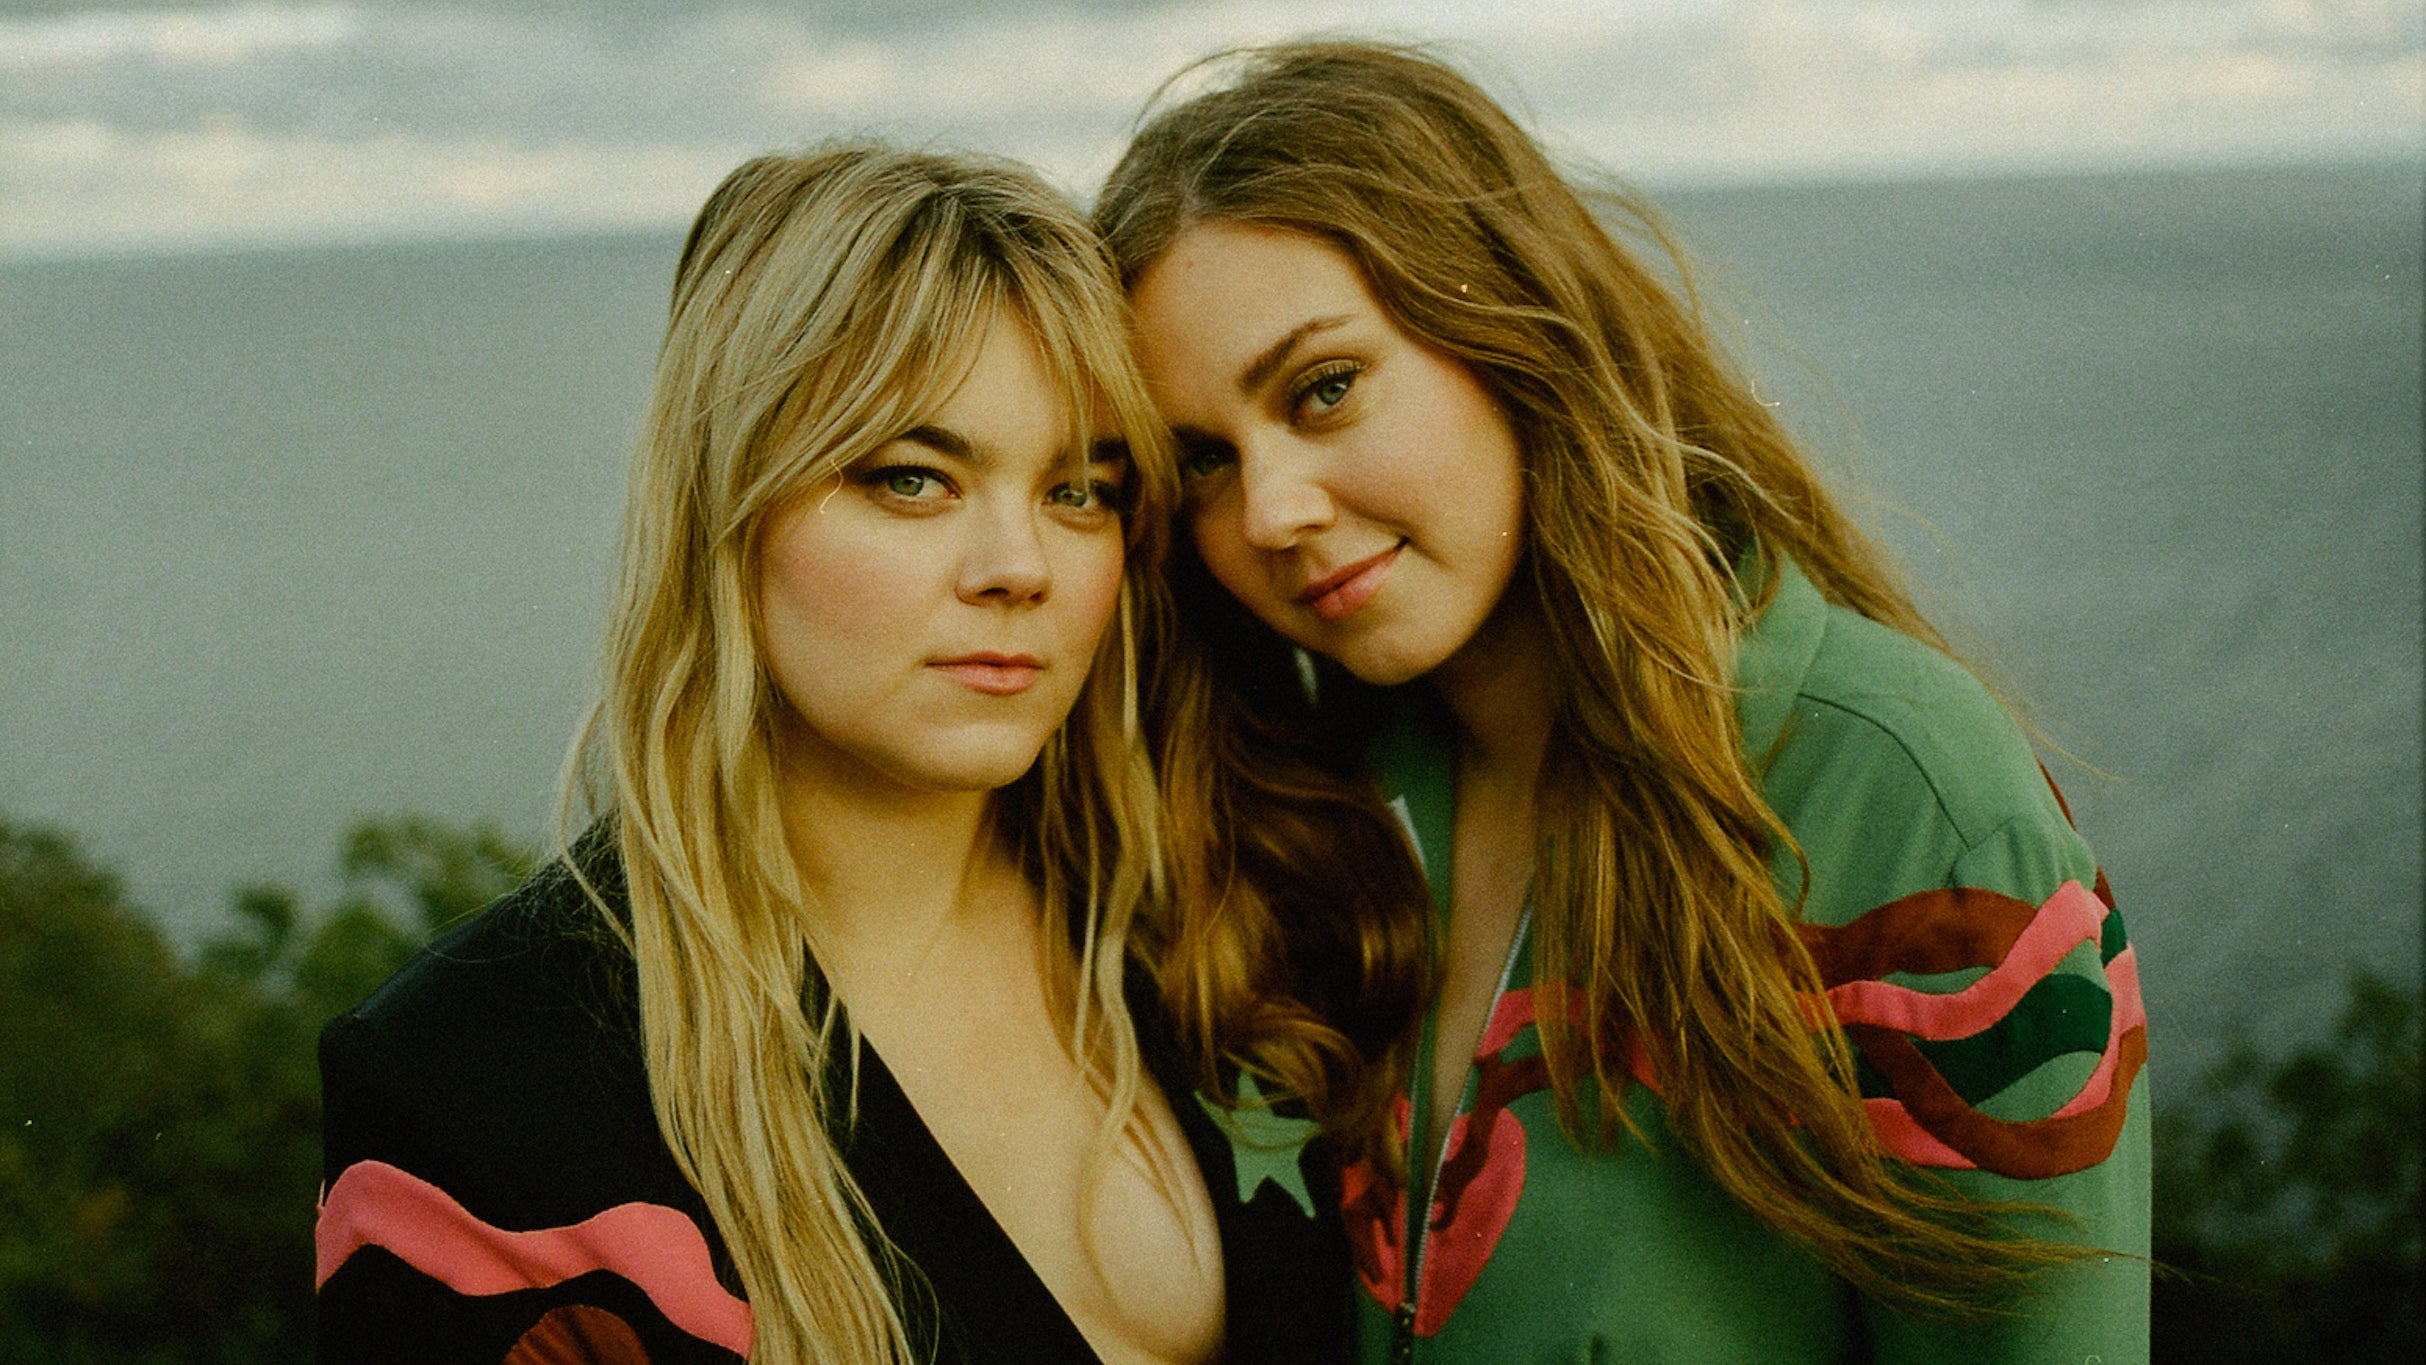 First Aid Kit - Palomino Tour with Hurray for the Riff Raff